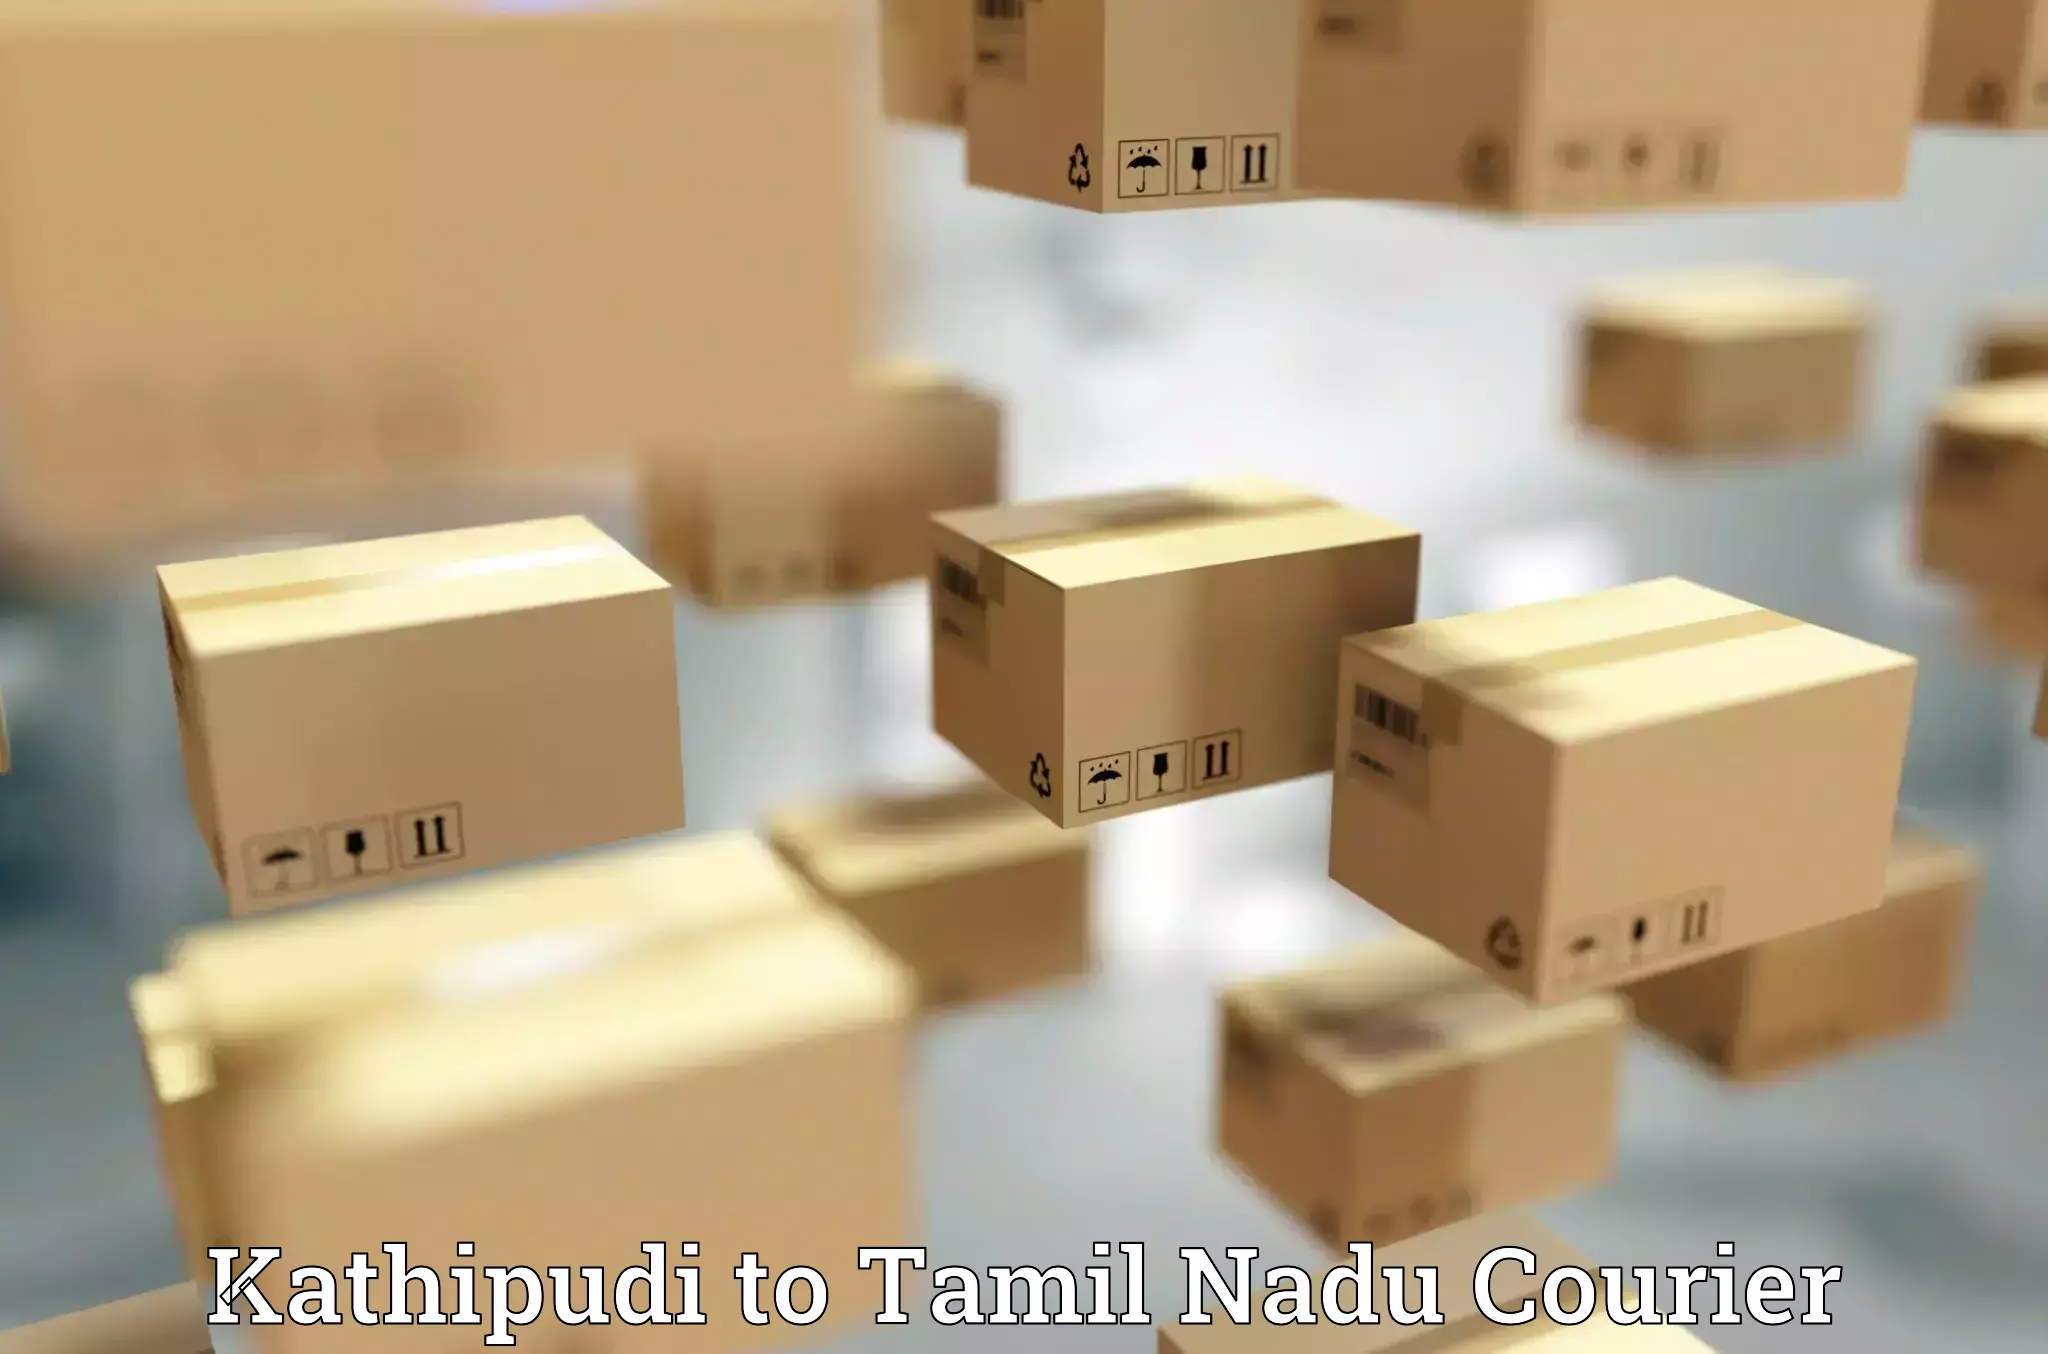 Reliable delivery network Kathipudi to Melur